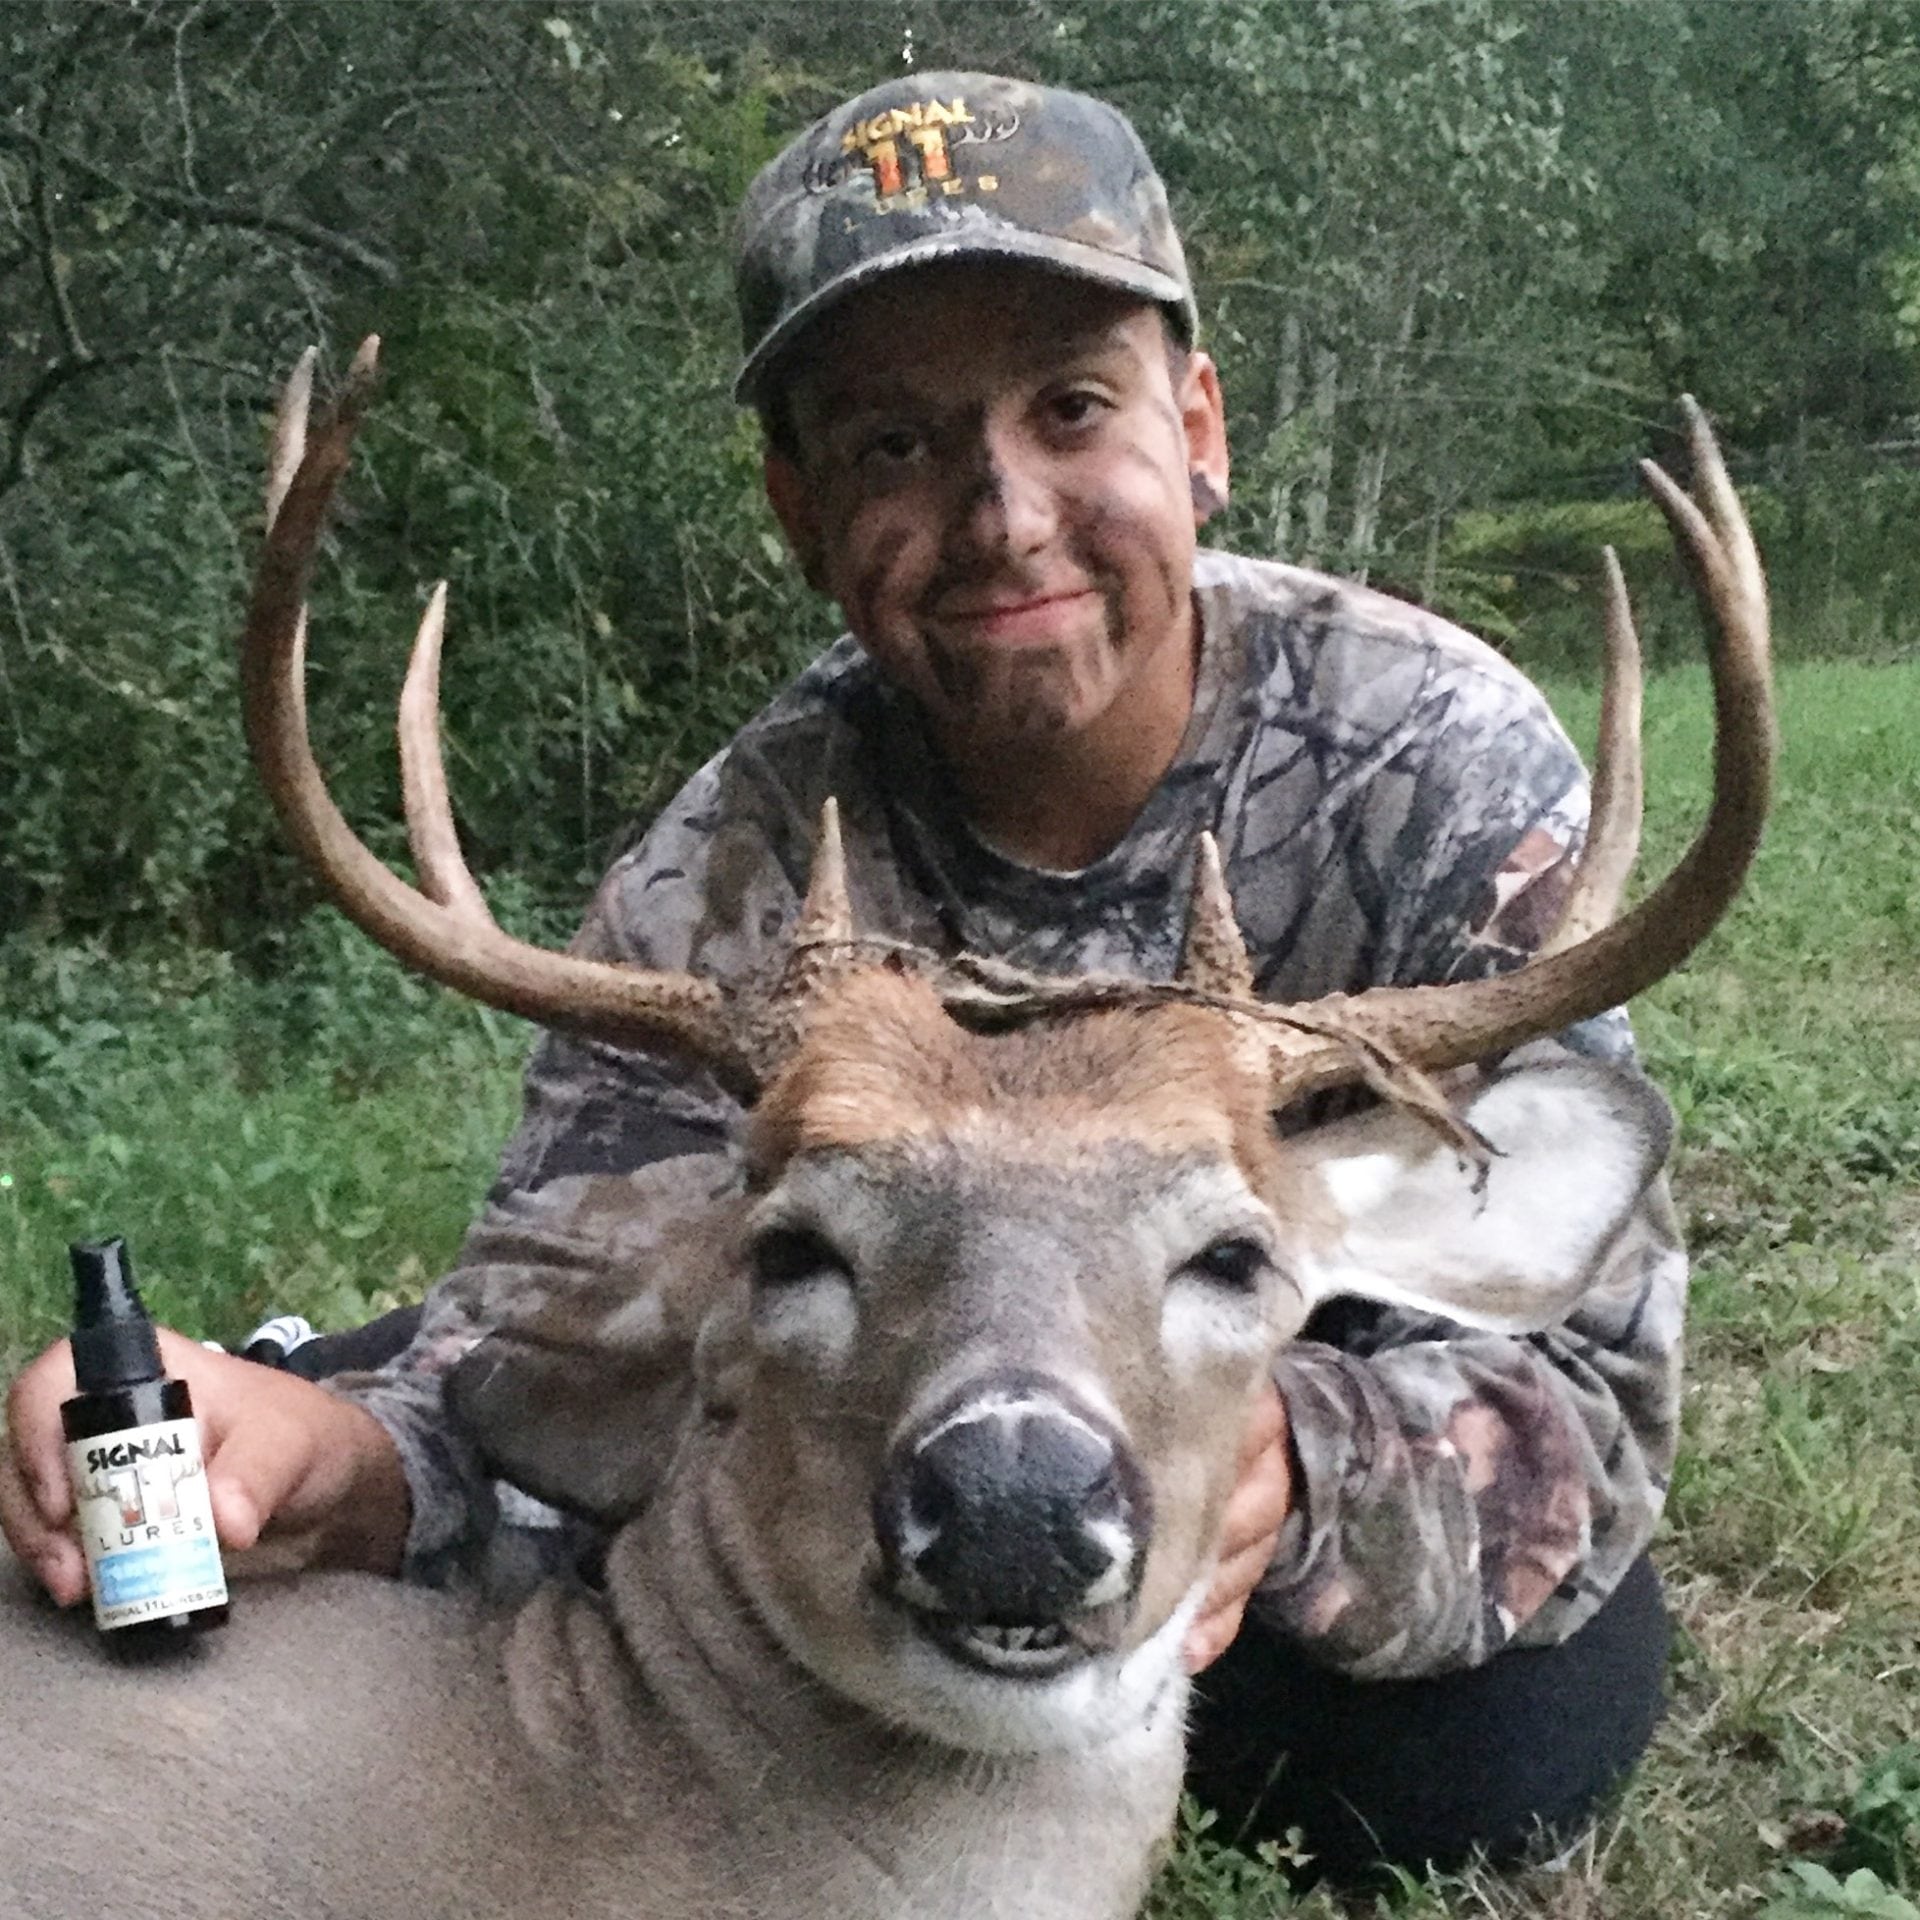 A man holding a beer in his hand while sitting next to a deer.